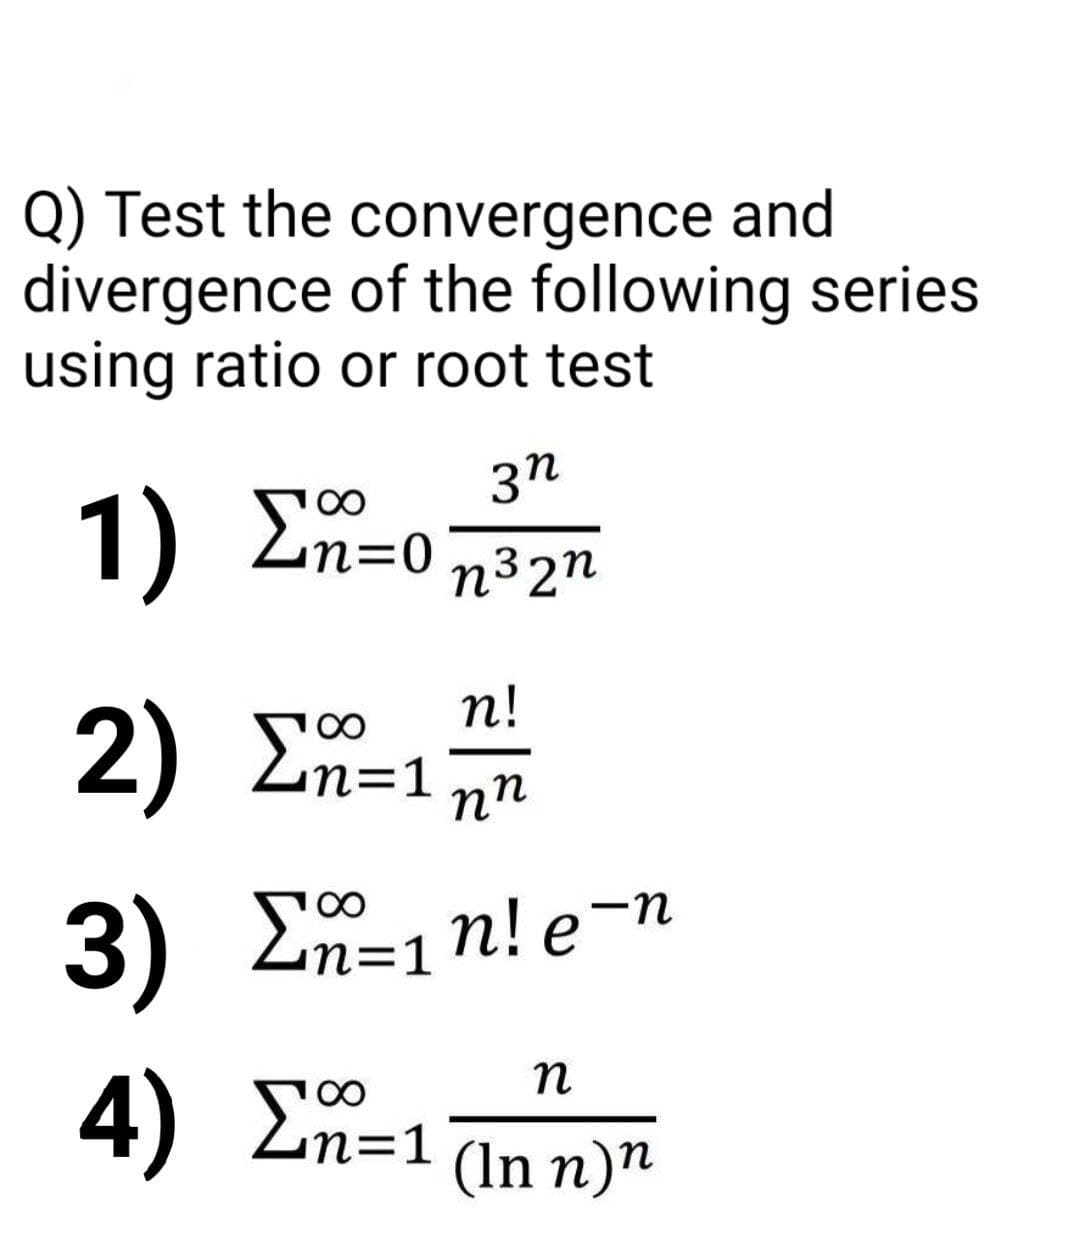 Q) Test the convergence and
divergence of the following series
using ratio or root test
3η
1) Σn=0n32n
n!
2) Σ
00
η=1
nn
3) Σ=1n!e=n
η
4)
Σ=1
(In n)η